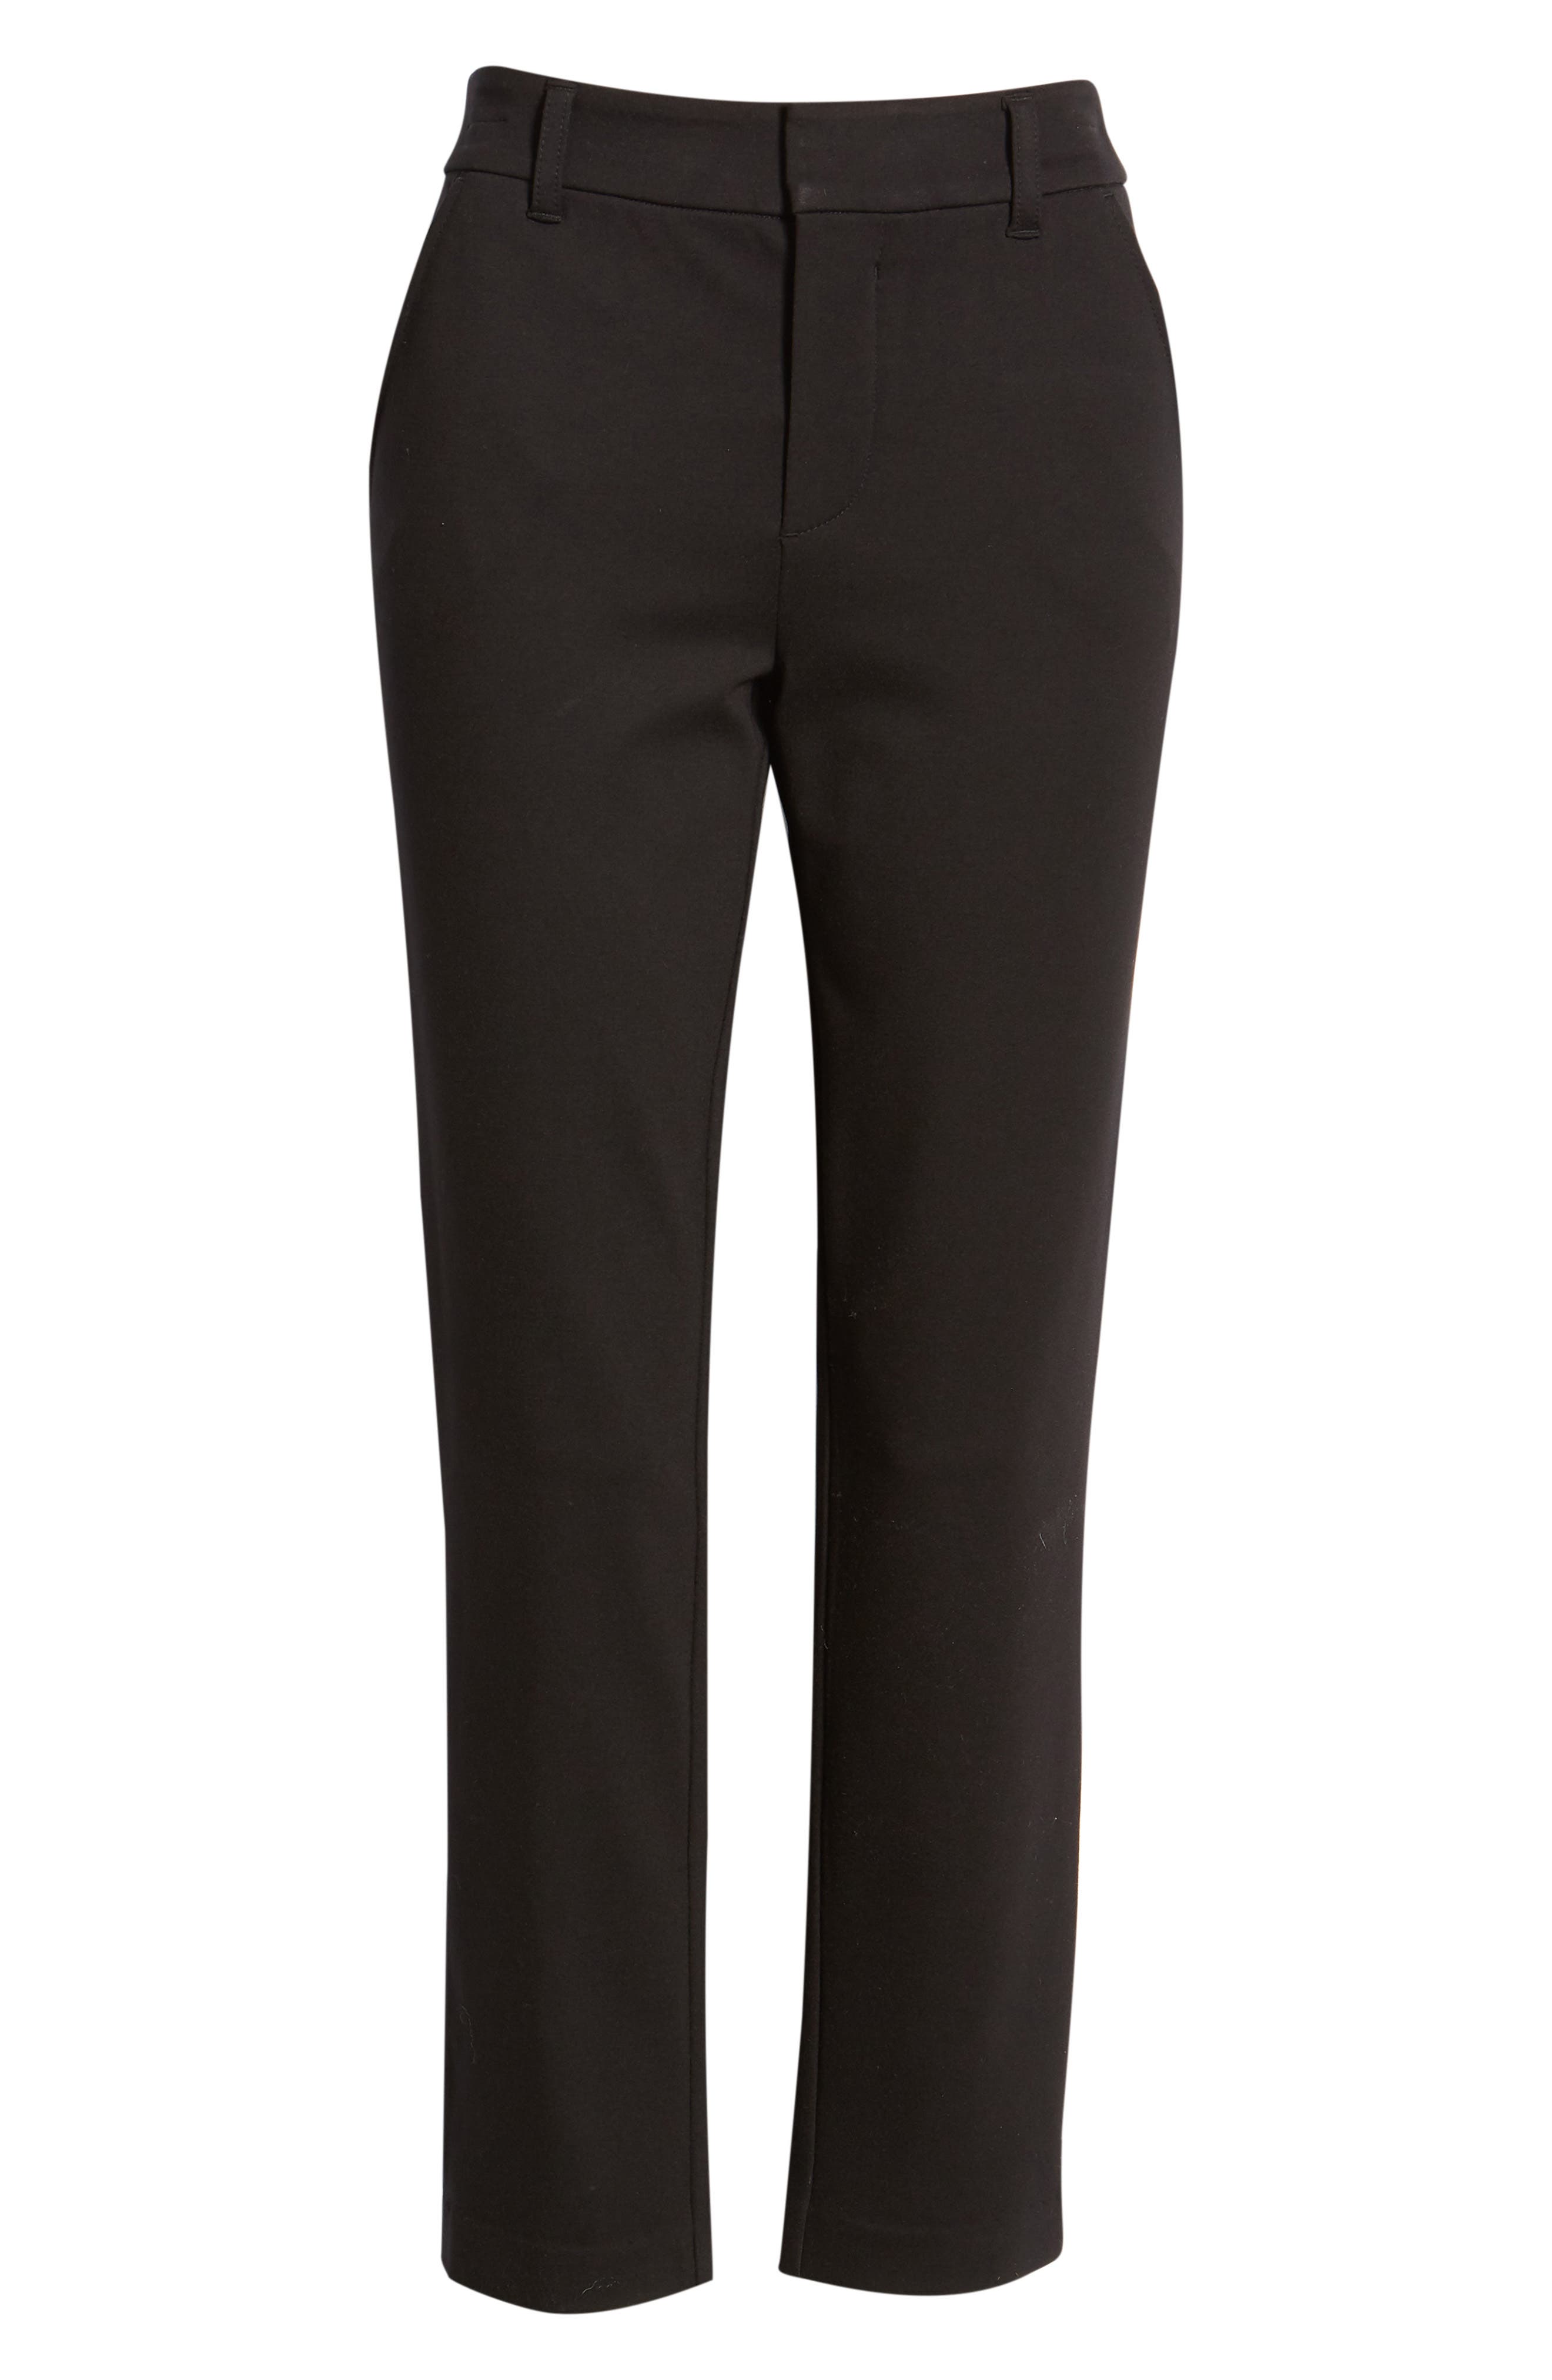 lined ladies trousers